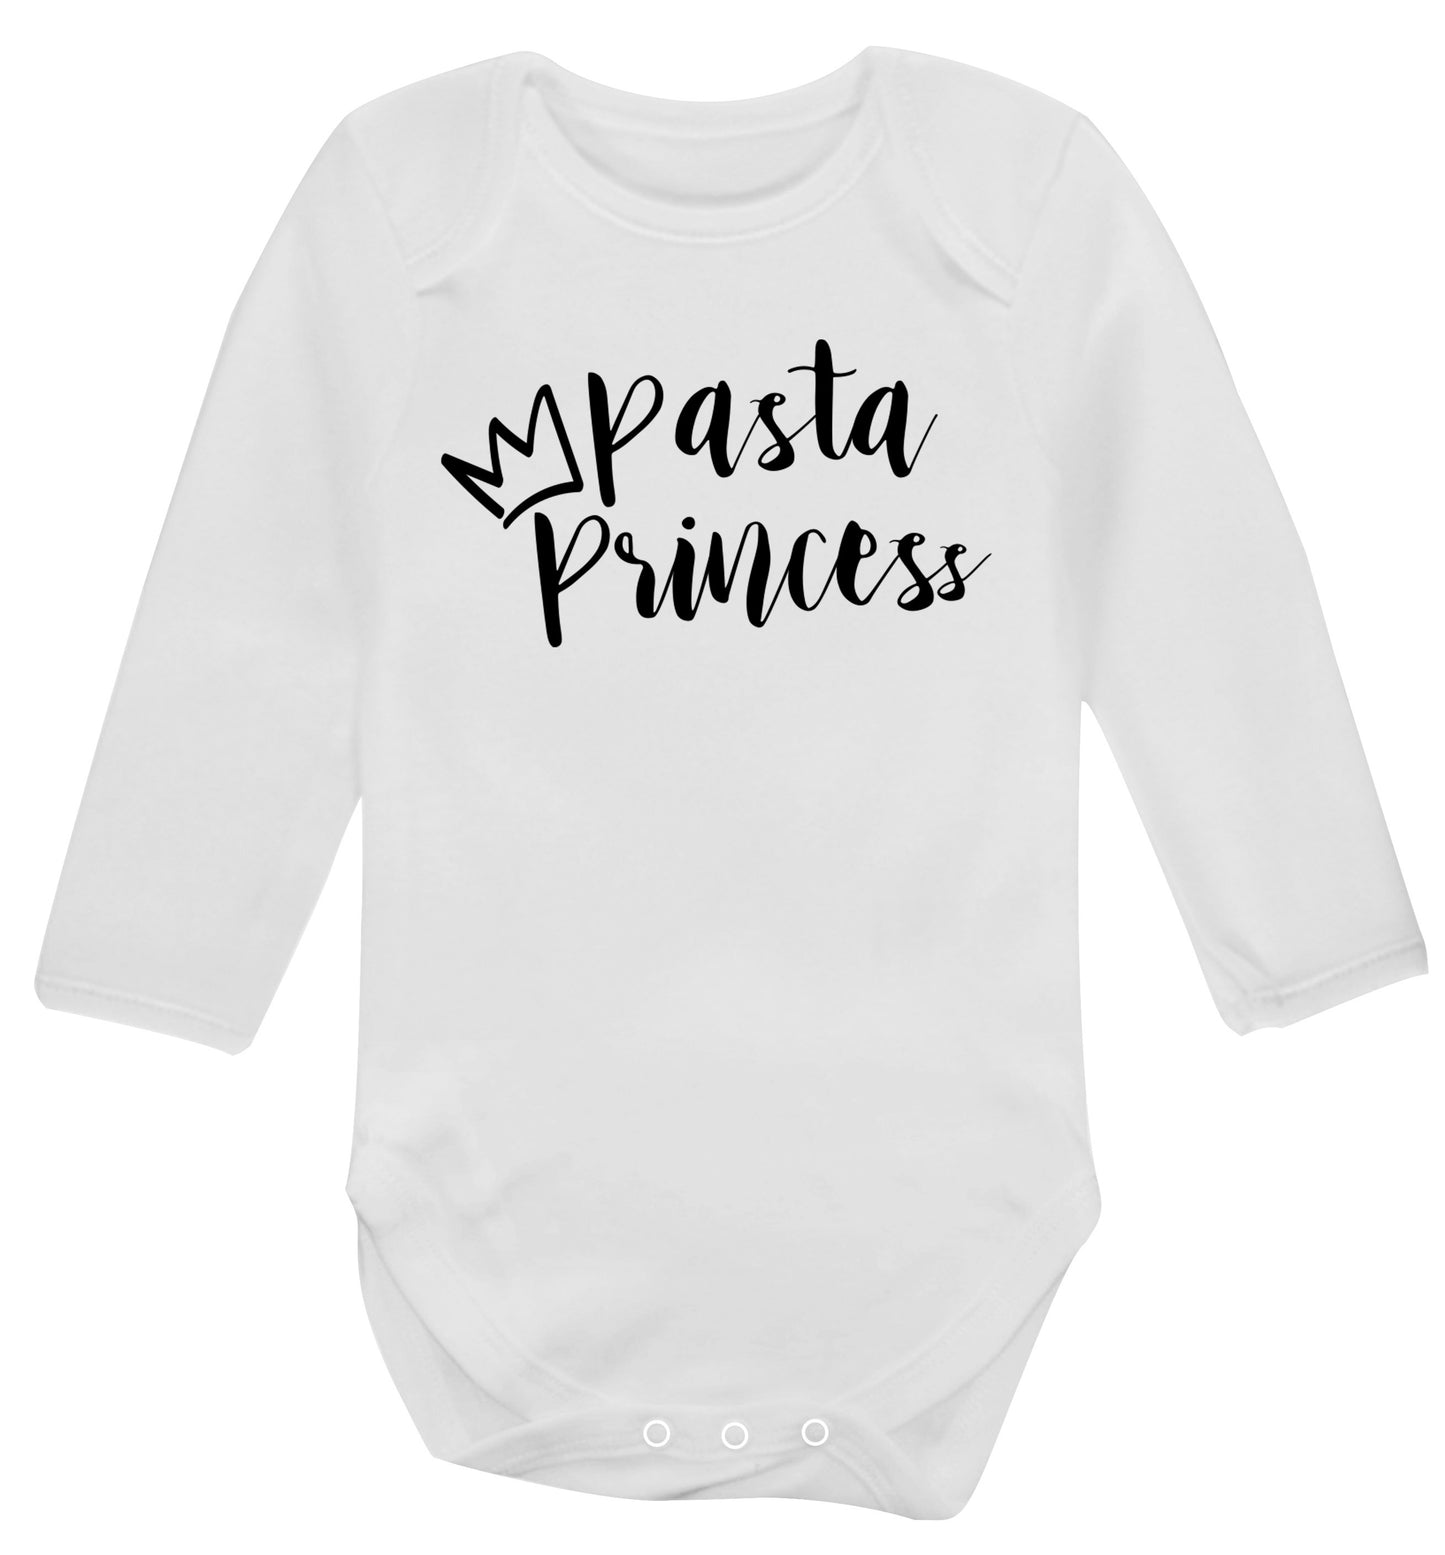 Pasta Princess Baby Vest long sleeved white 6-12 months